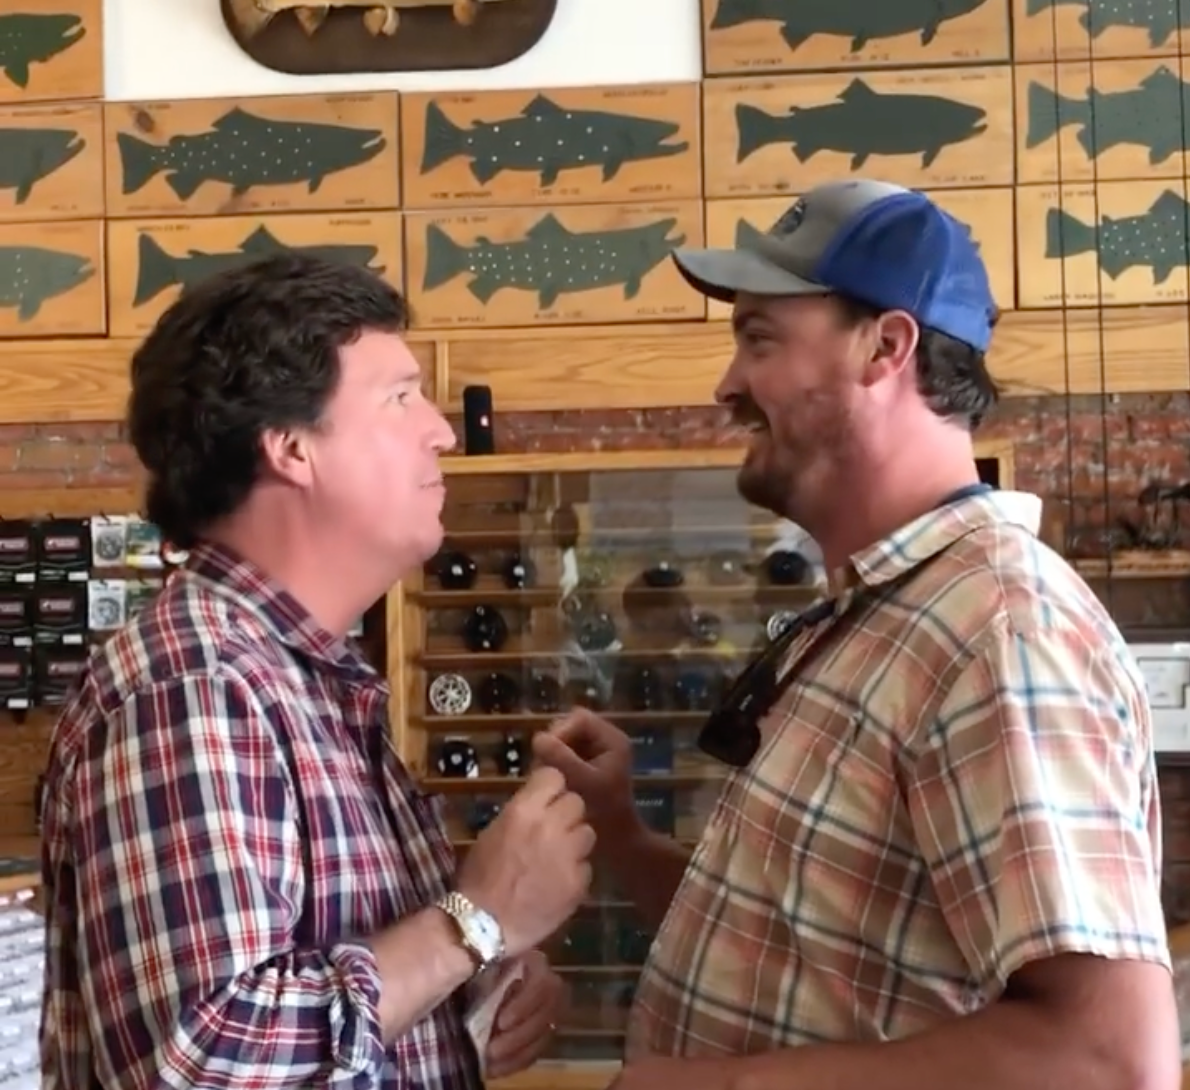 A man posted a video of himself telling Tucker Carlson that he was ‘the worst person alive’ in a fishing goods store in Montana